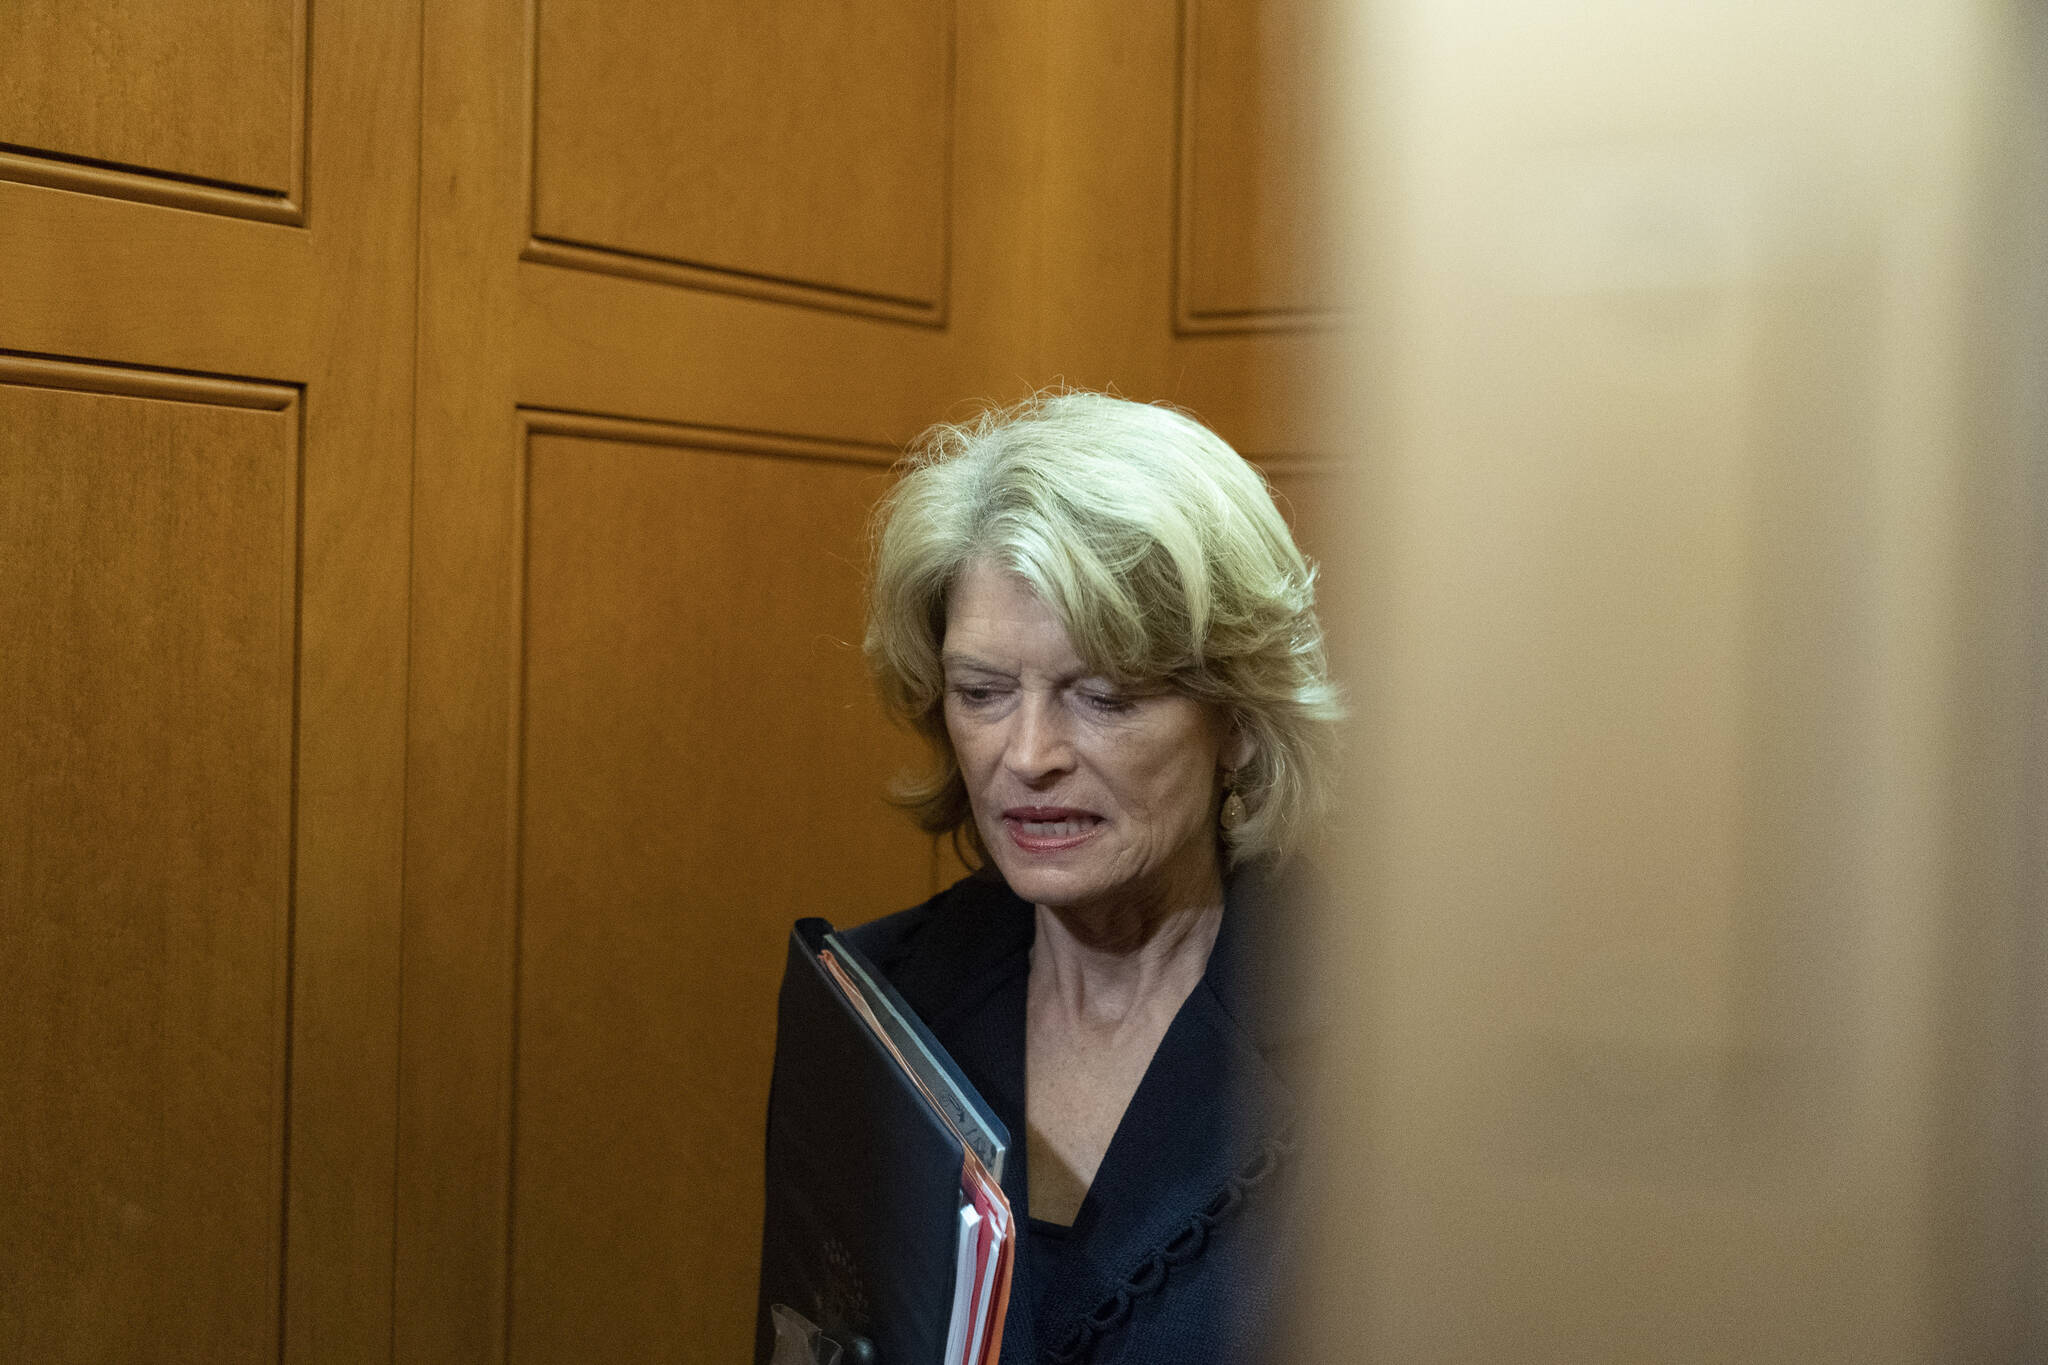 In this Oct. 7, 2021, file photo, Sen. Lisa Murkowski, R-Alaska, stands in an elevator as she departs, on Capitol Hill, in Washington. A man described as a “normal guy” who kept a low profile in his rural Alaska community faces charges he threatened to hire an assassin to kill the U.S. senator. Jay Allen Johnson was scheduled to be arraigned later Friday, Oct. 8, 2021, on charges related to phone threats authorities say he made against Murkowski. Johnson was arrested earlier in the week and was being held in a Fairbanks jail ahead of the federal court hearing. (AP Photo/Alex Brandon, File)